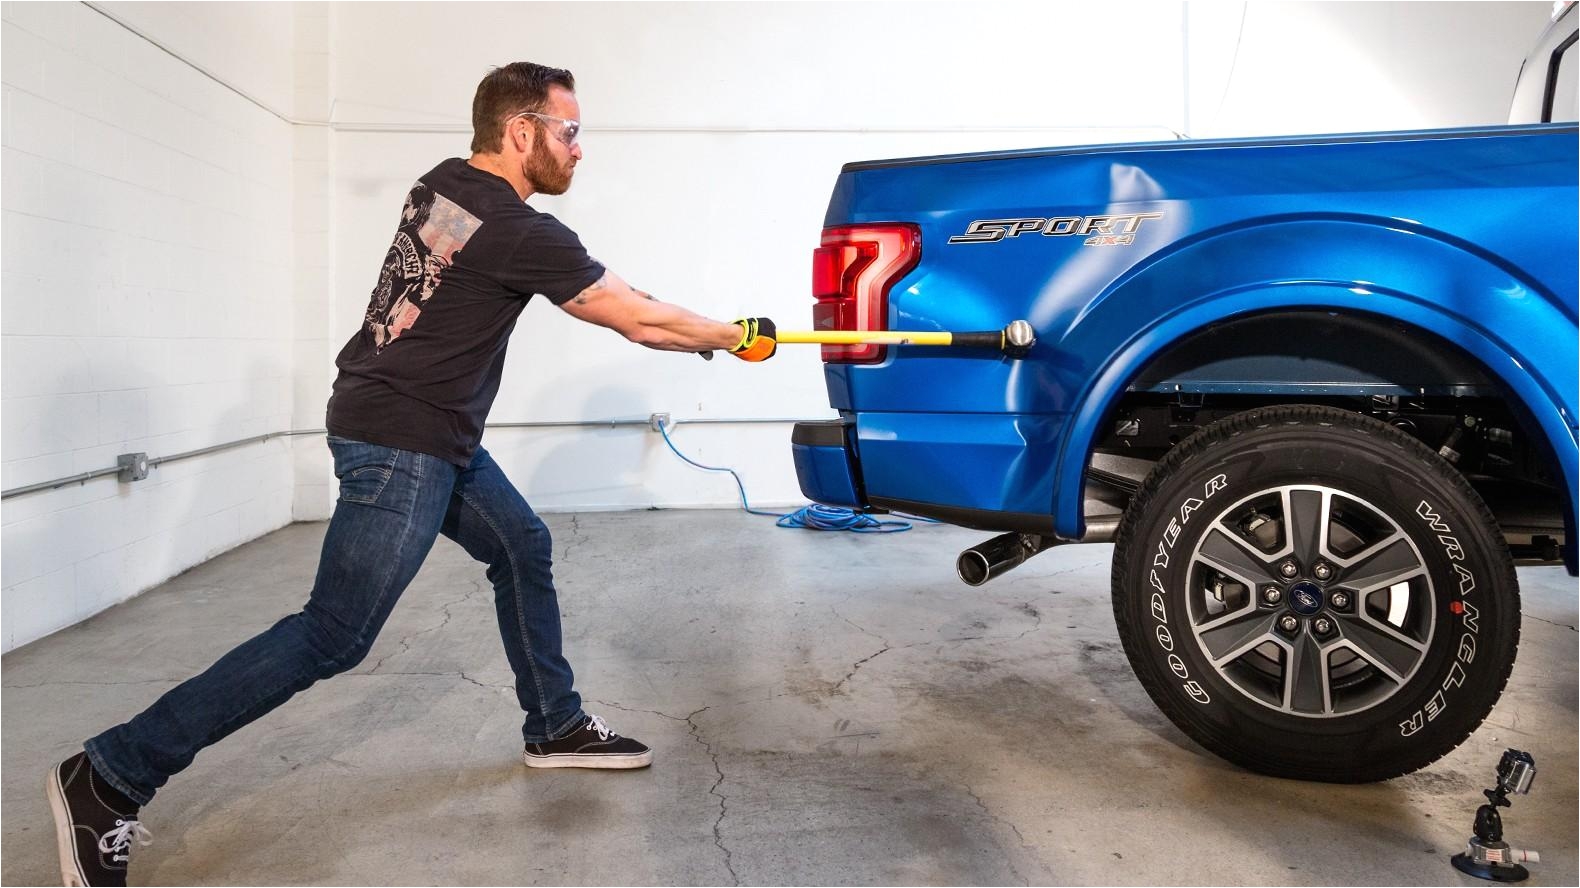 whats crazier than smashing an aluminum ford f 150 with a sledgehammer the repair bill